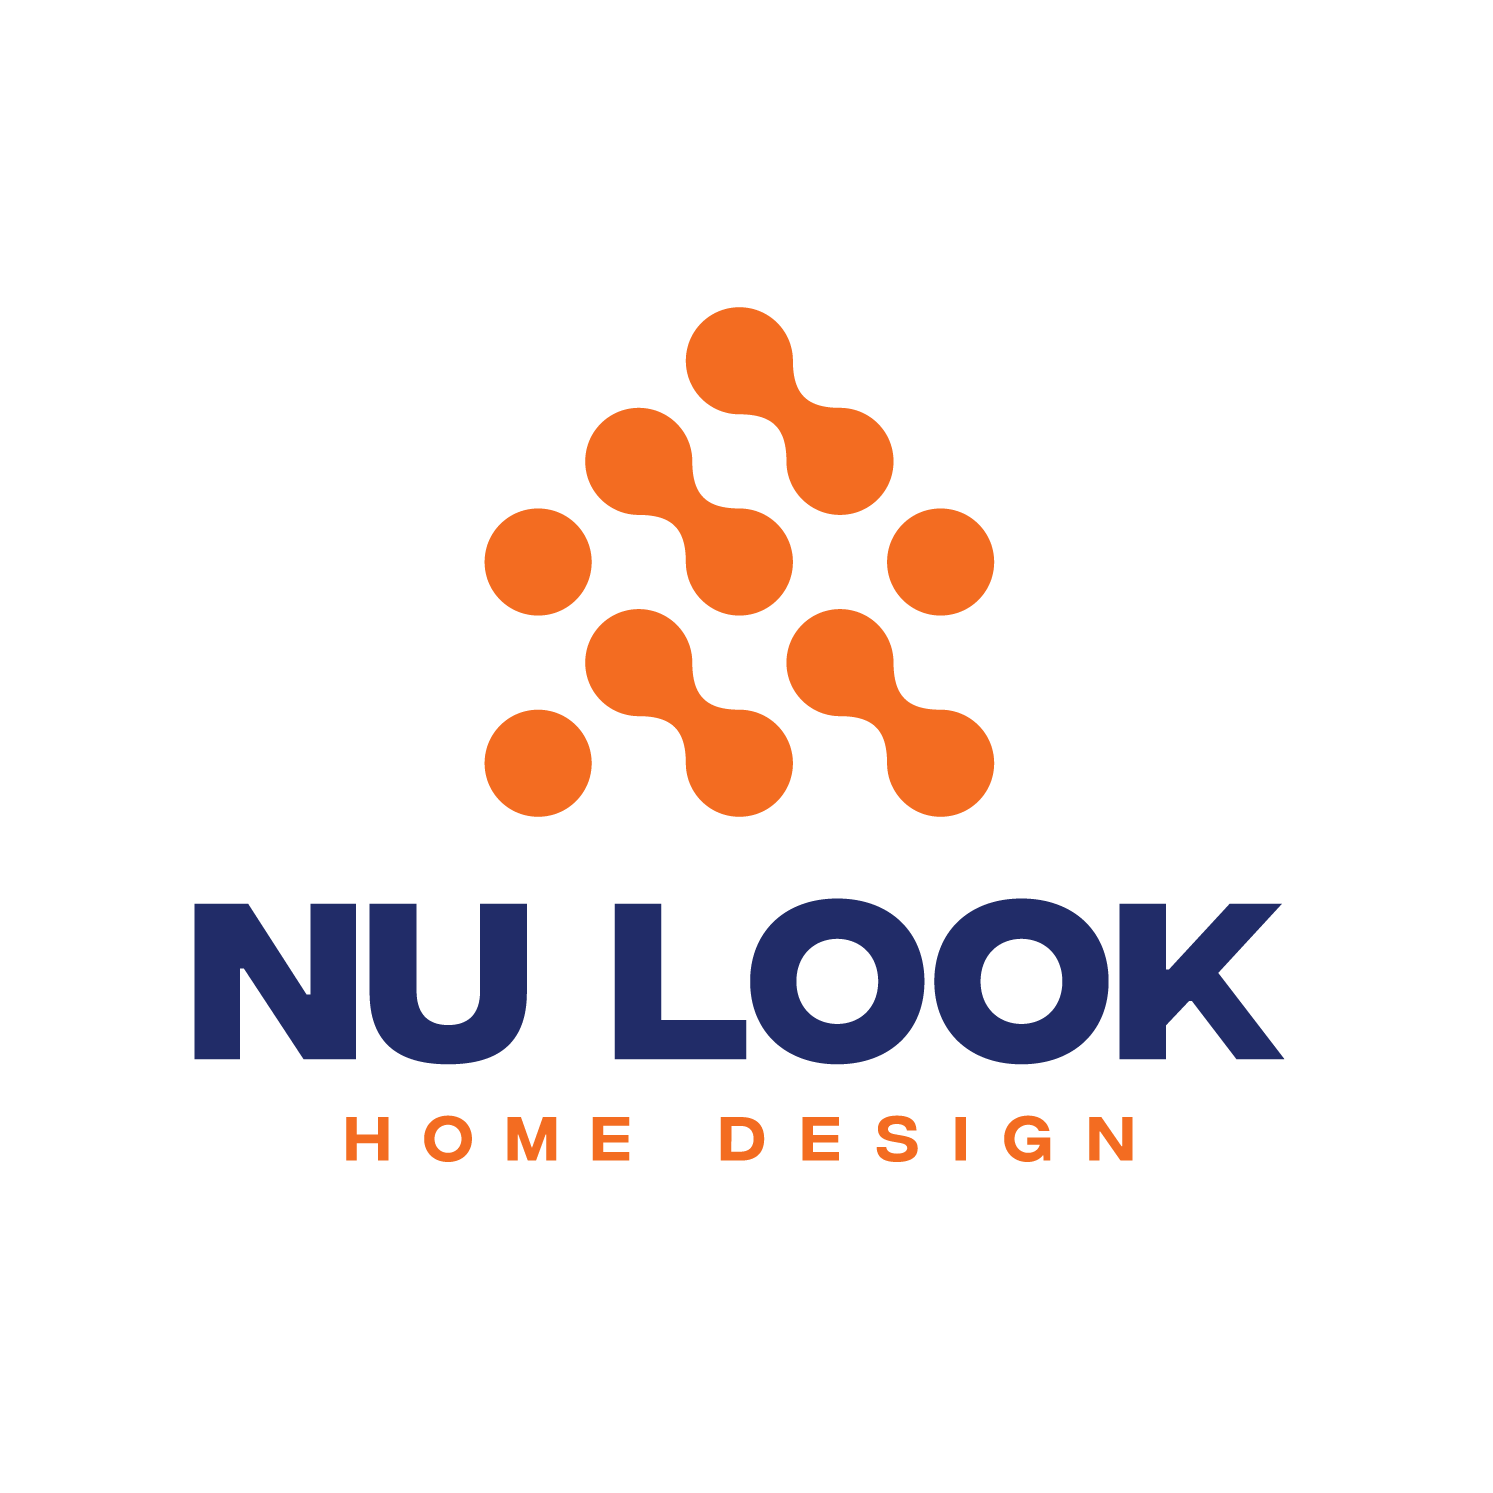 Nu Look Roofing, Siding, and Windows Logo